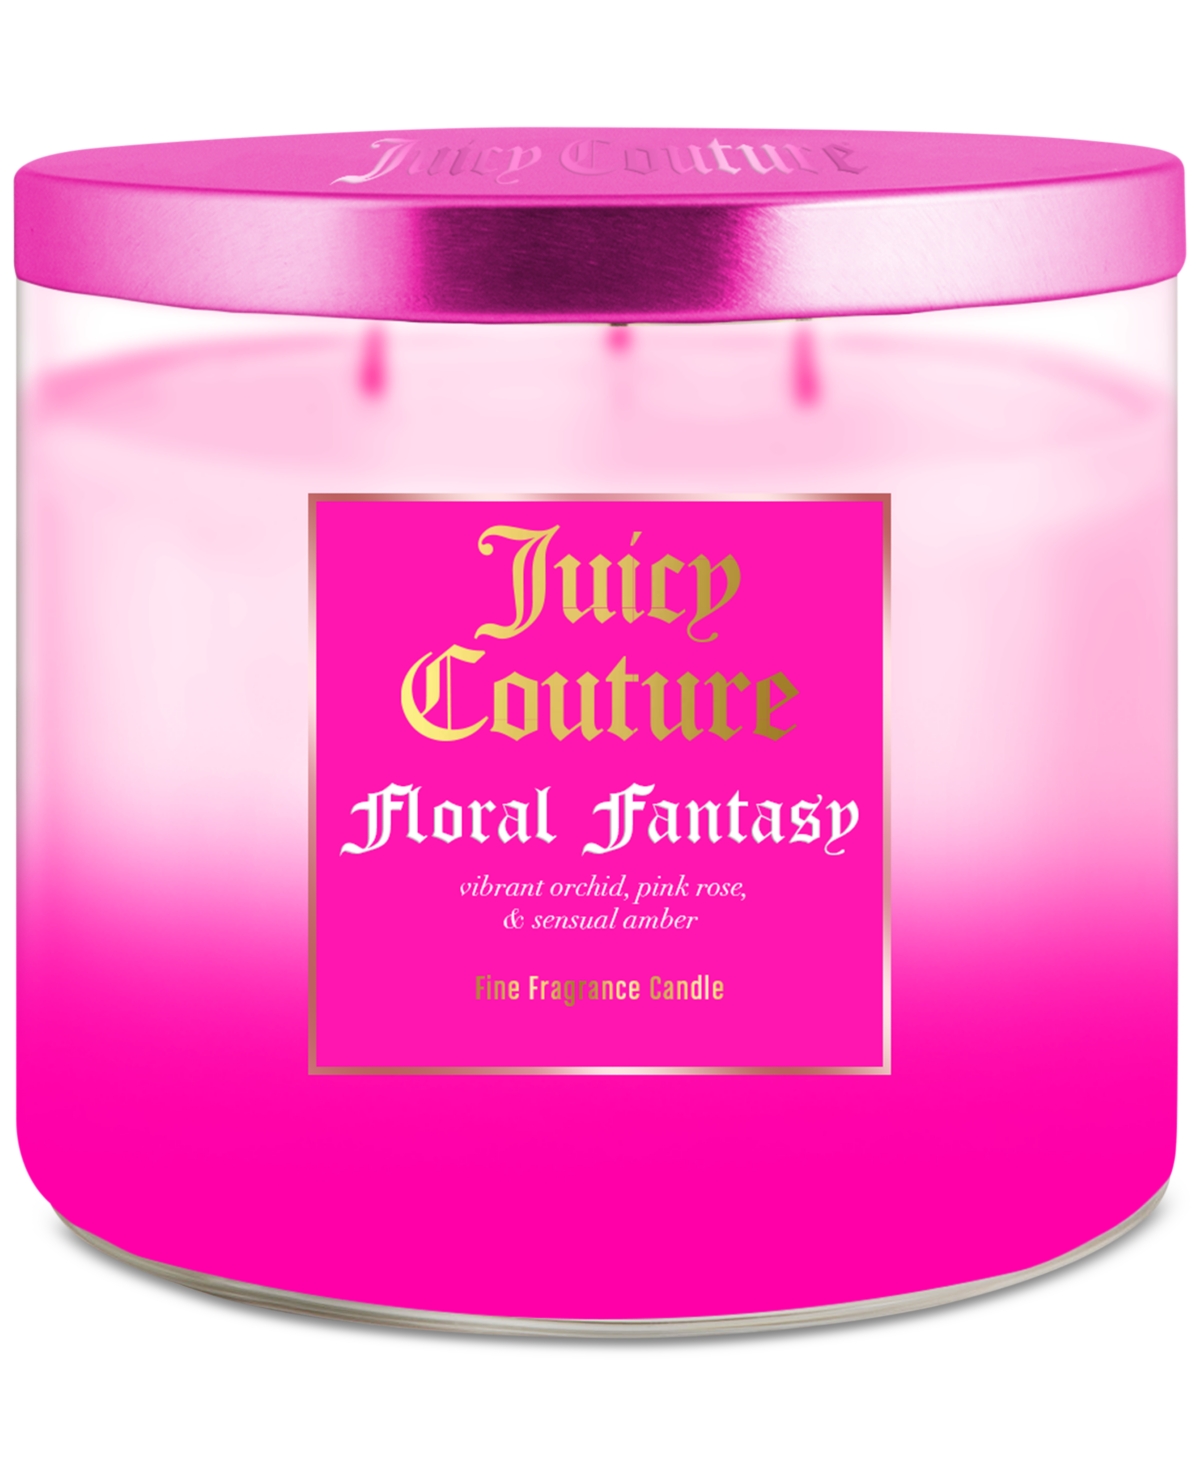 Juicy Couture Floral Fantasy Candle, 15 Oz.